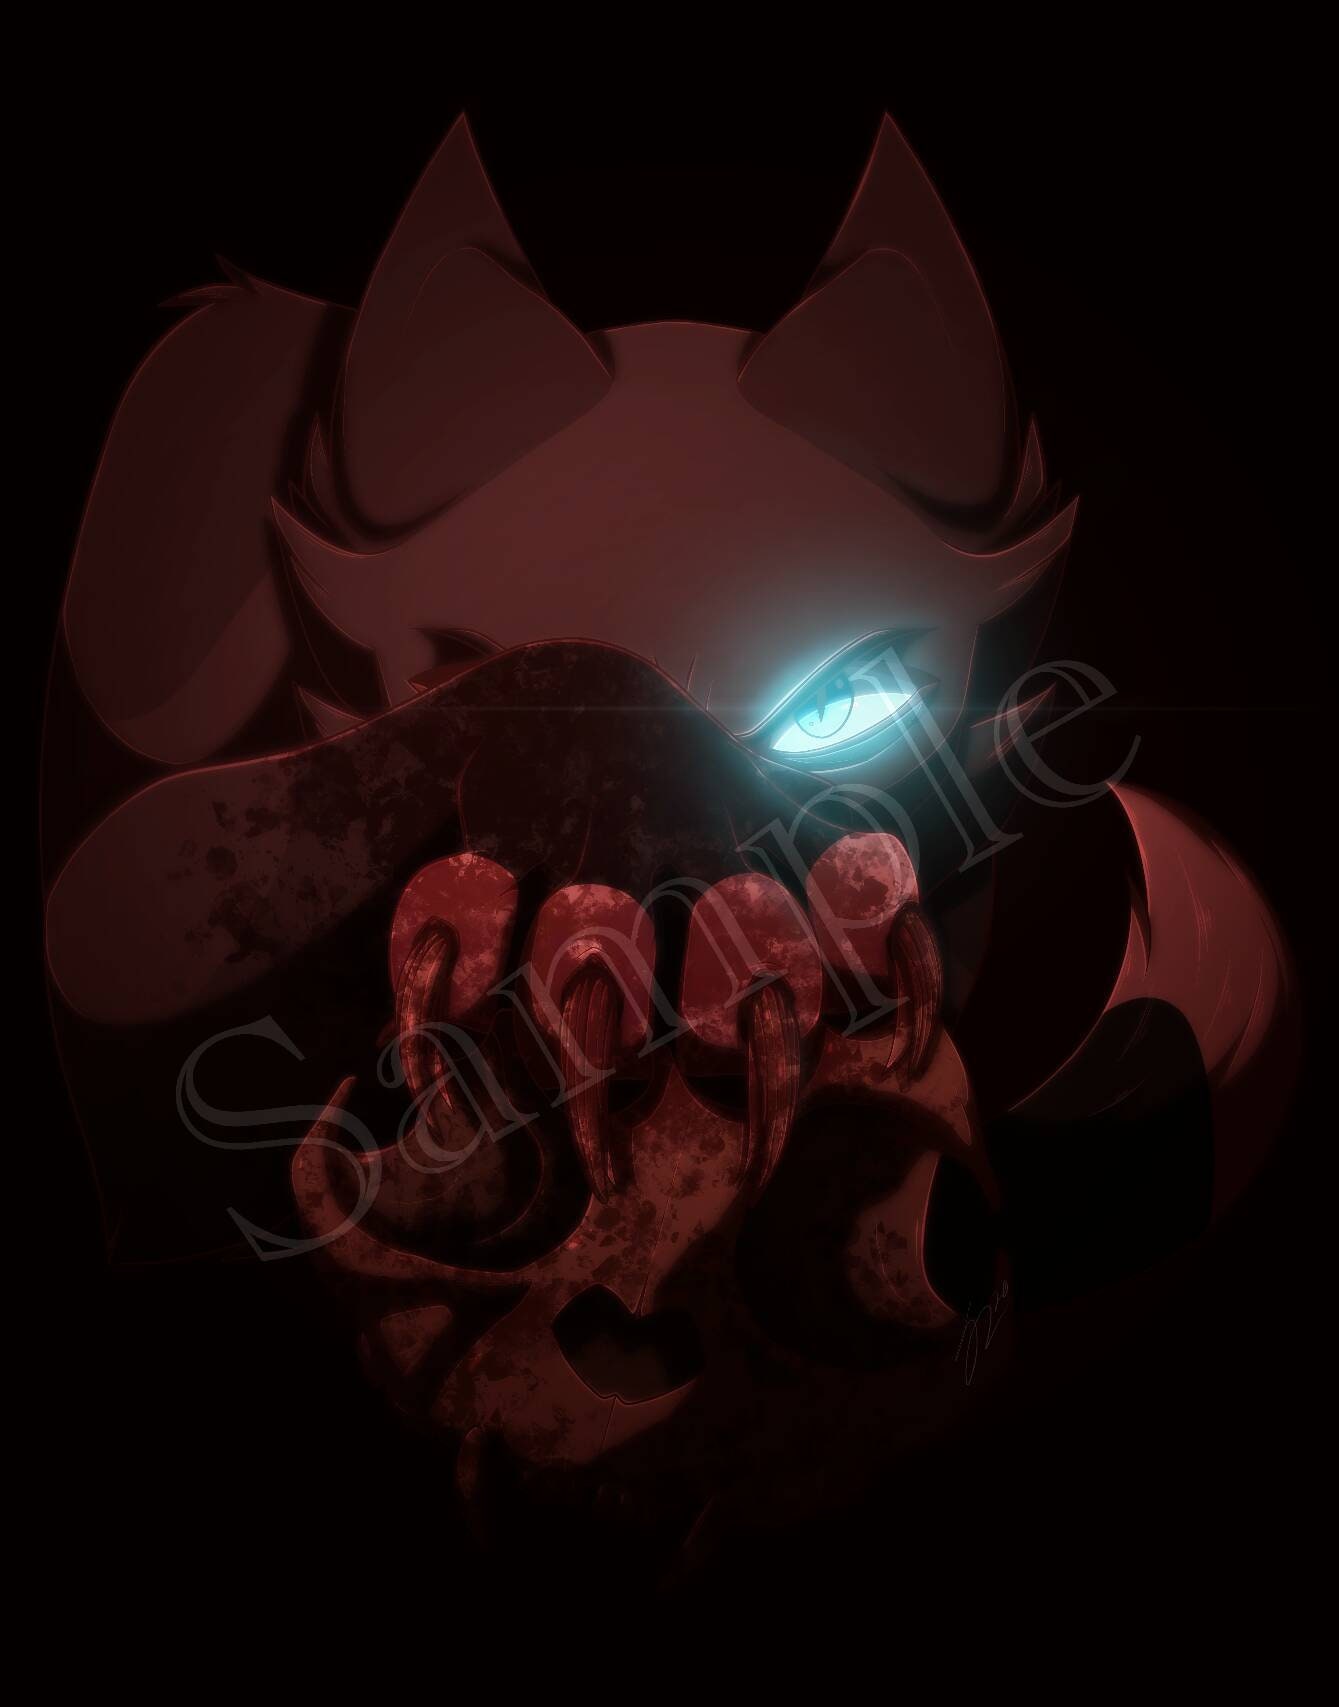 Warrior Cats: Scourge and Tiny | Art Board Print